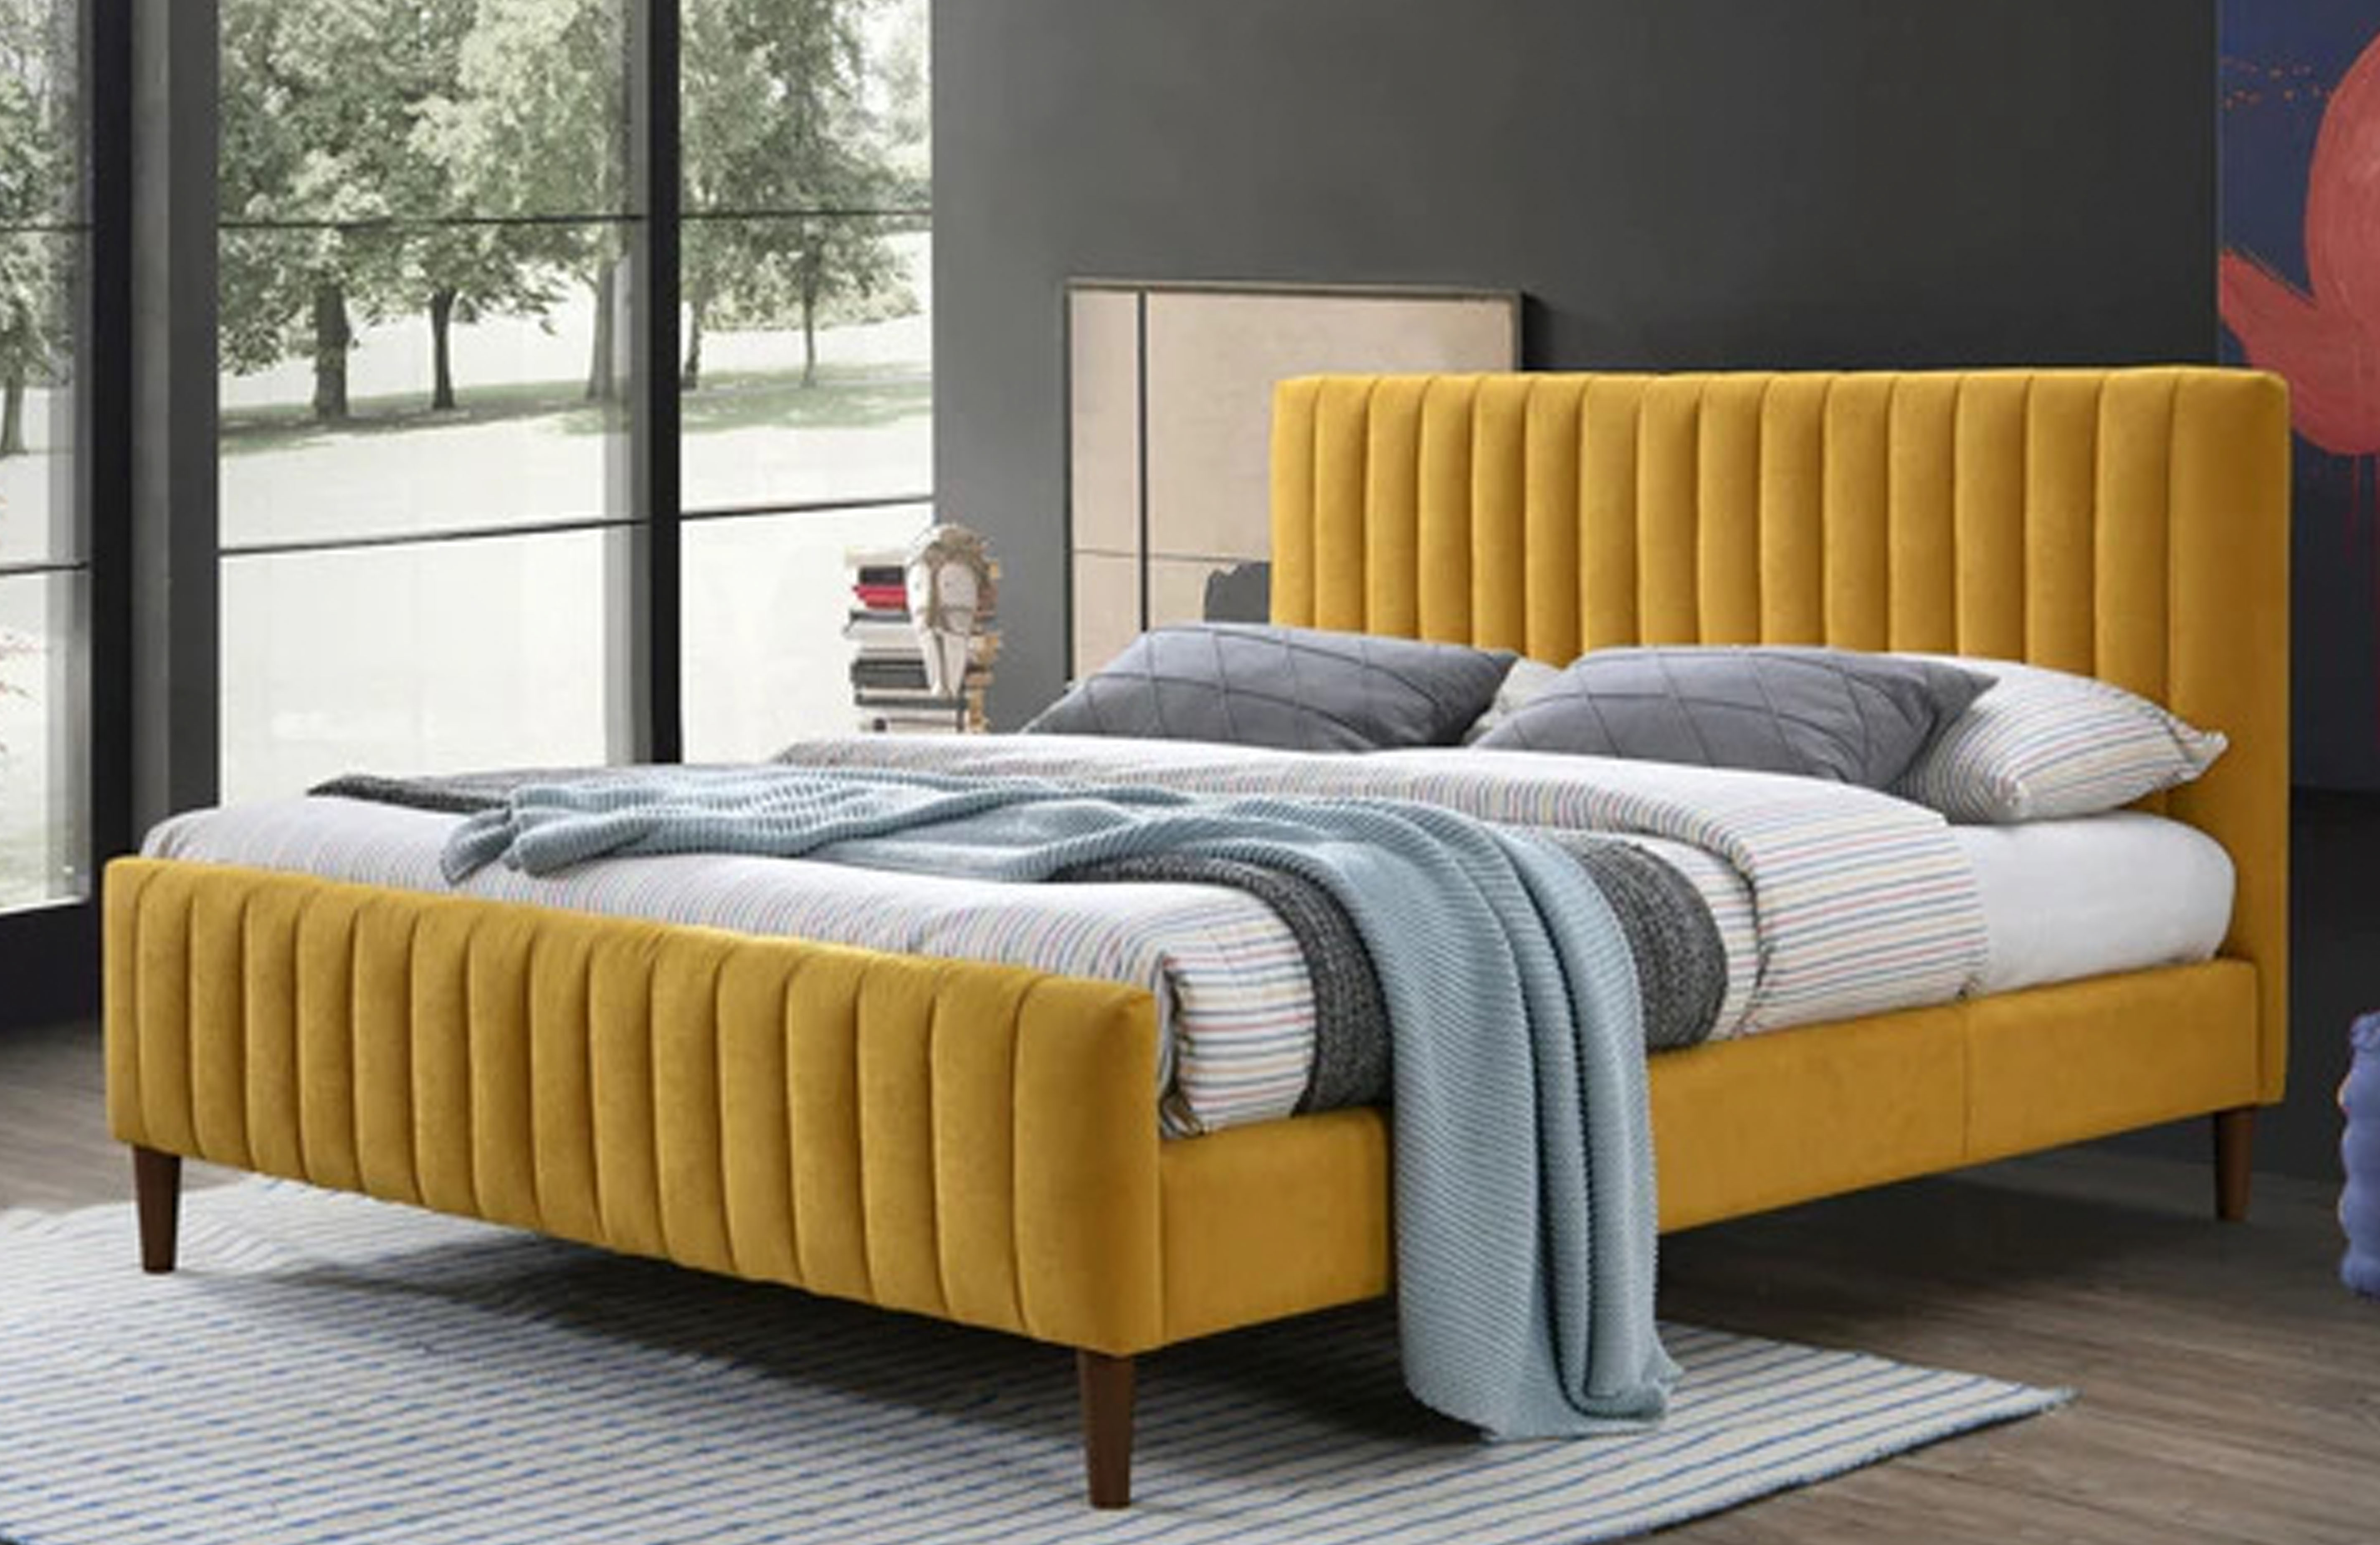 Lona yellow king size bed